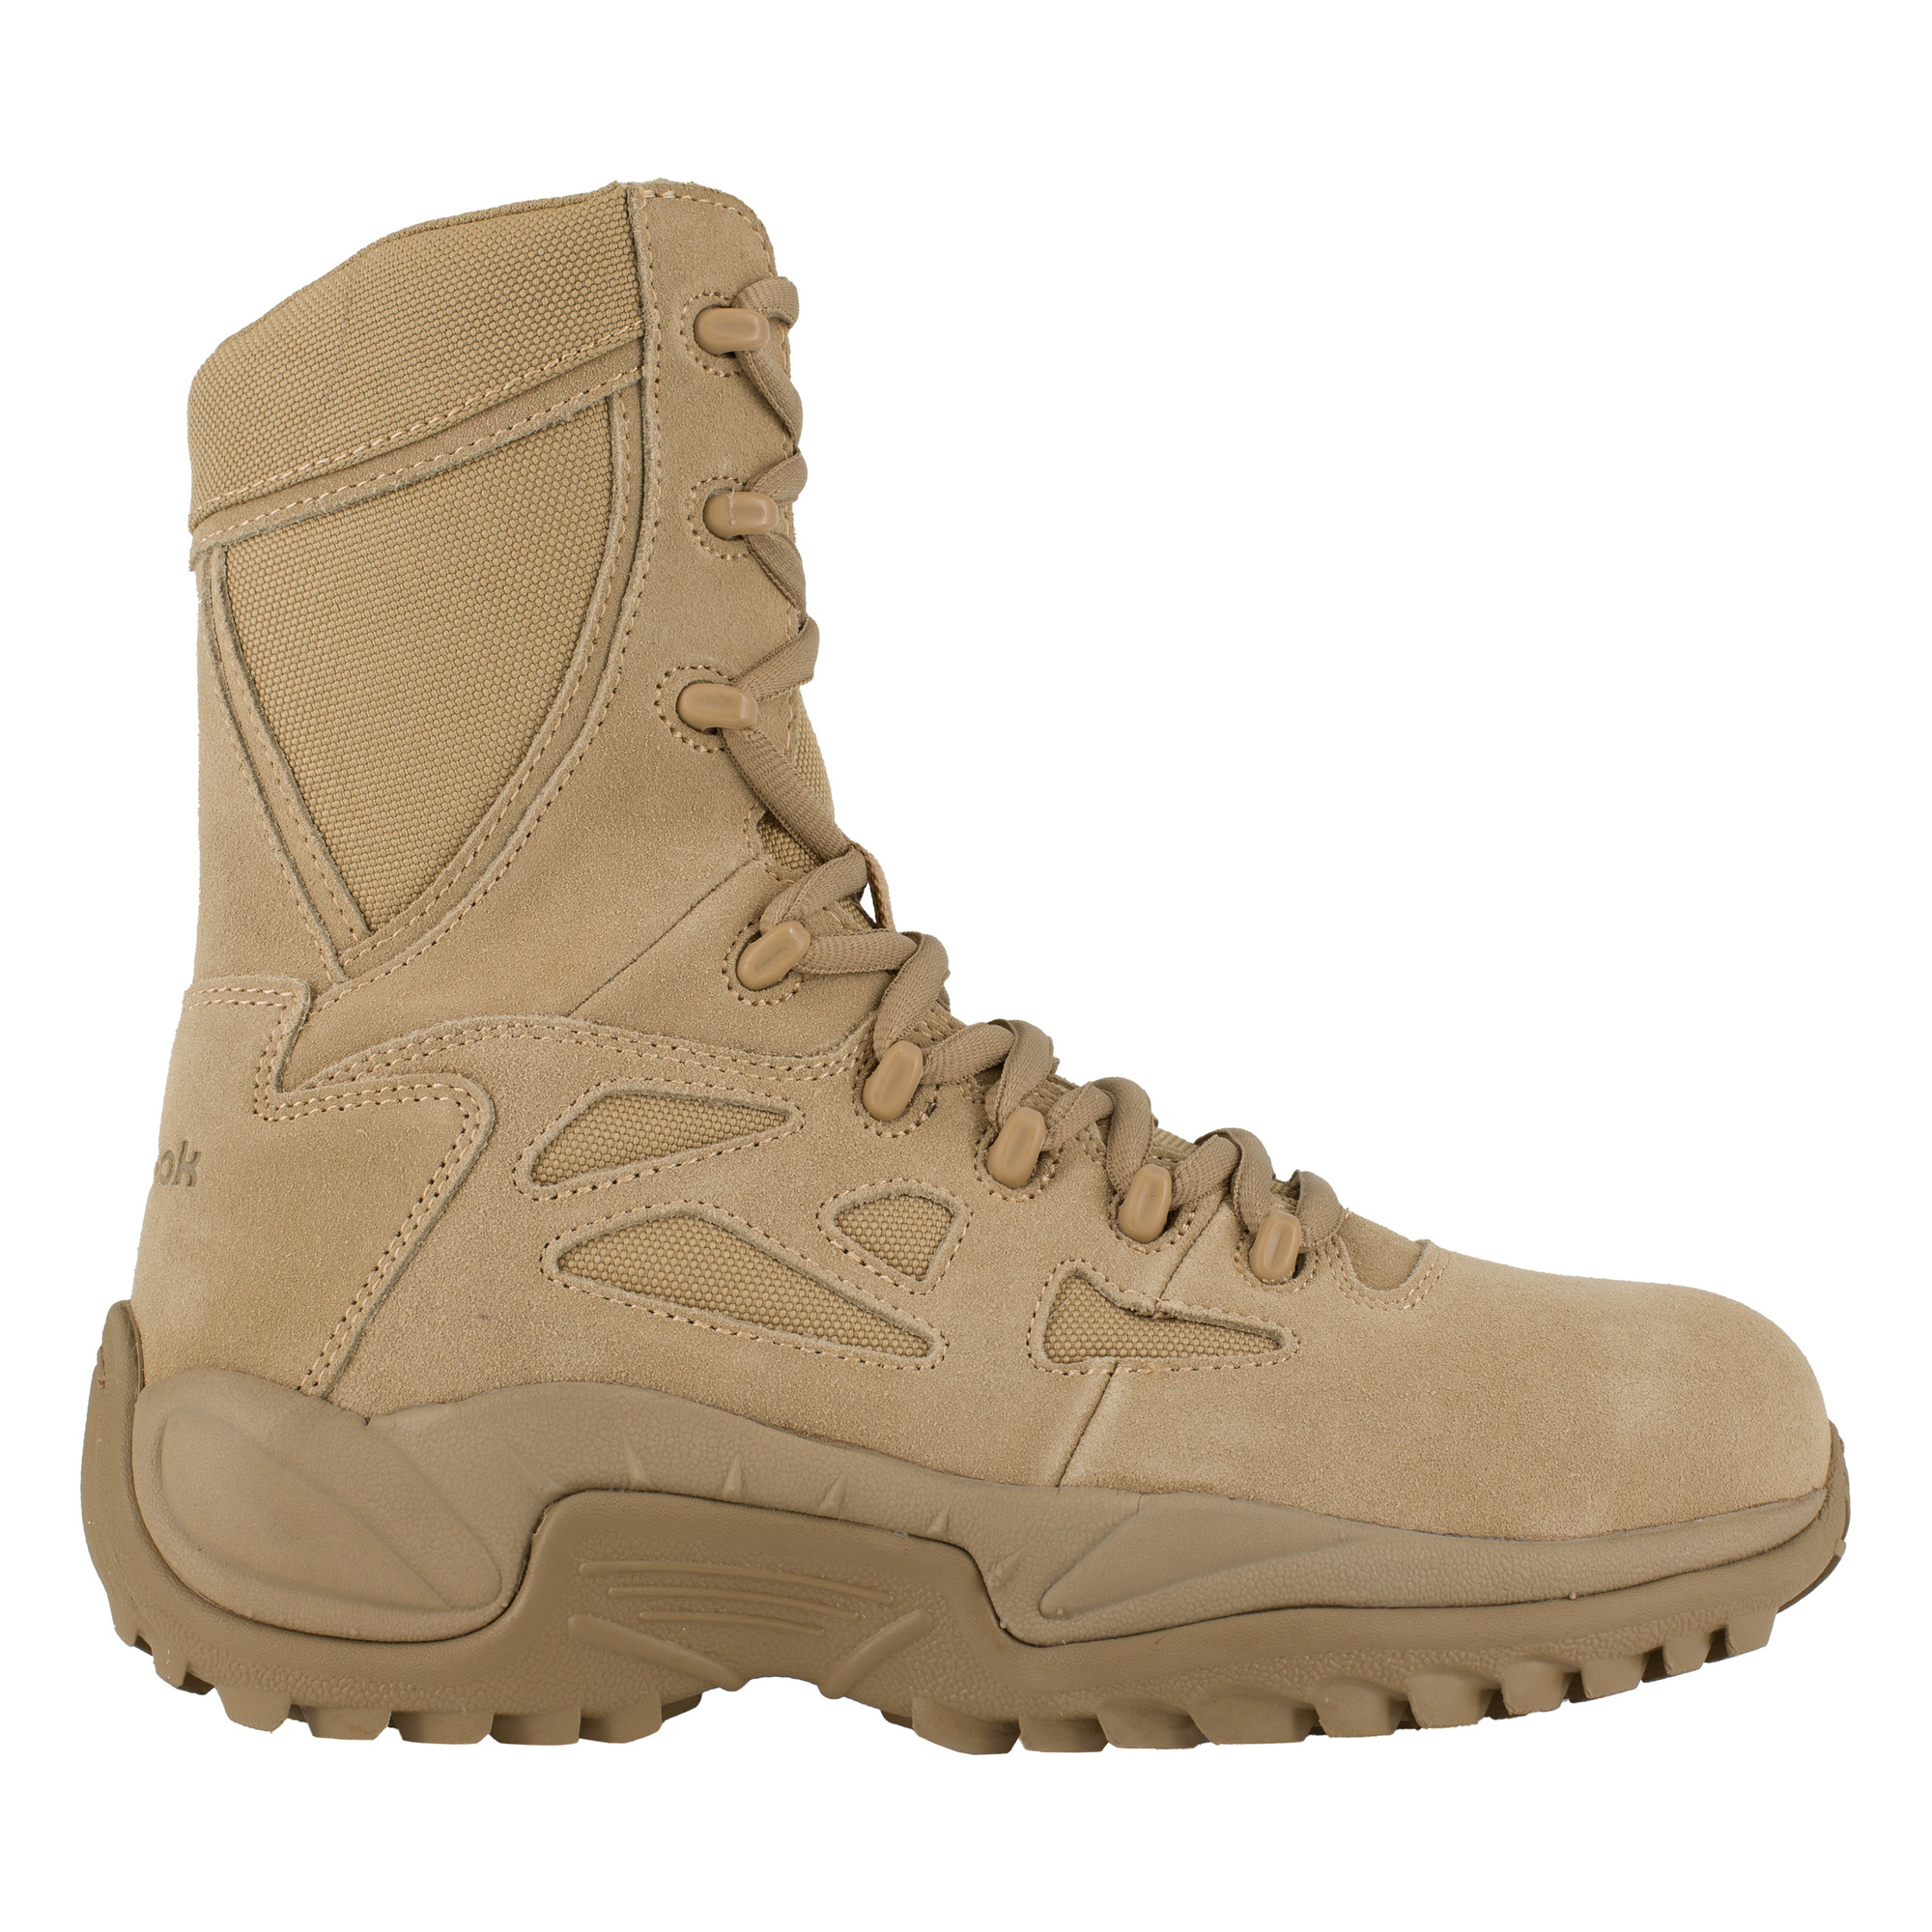 Reebok, 8Inch Stealth Tactical Boot with Side Zipper, Size 10, Width Wide, Color Desert Tan, Model RB894 -  RB894-W-10.0